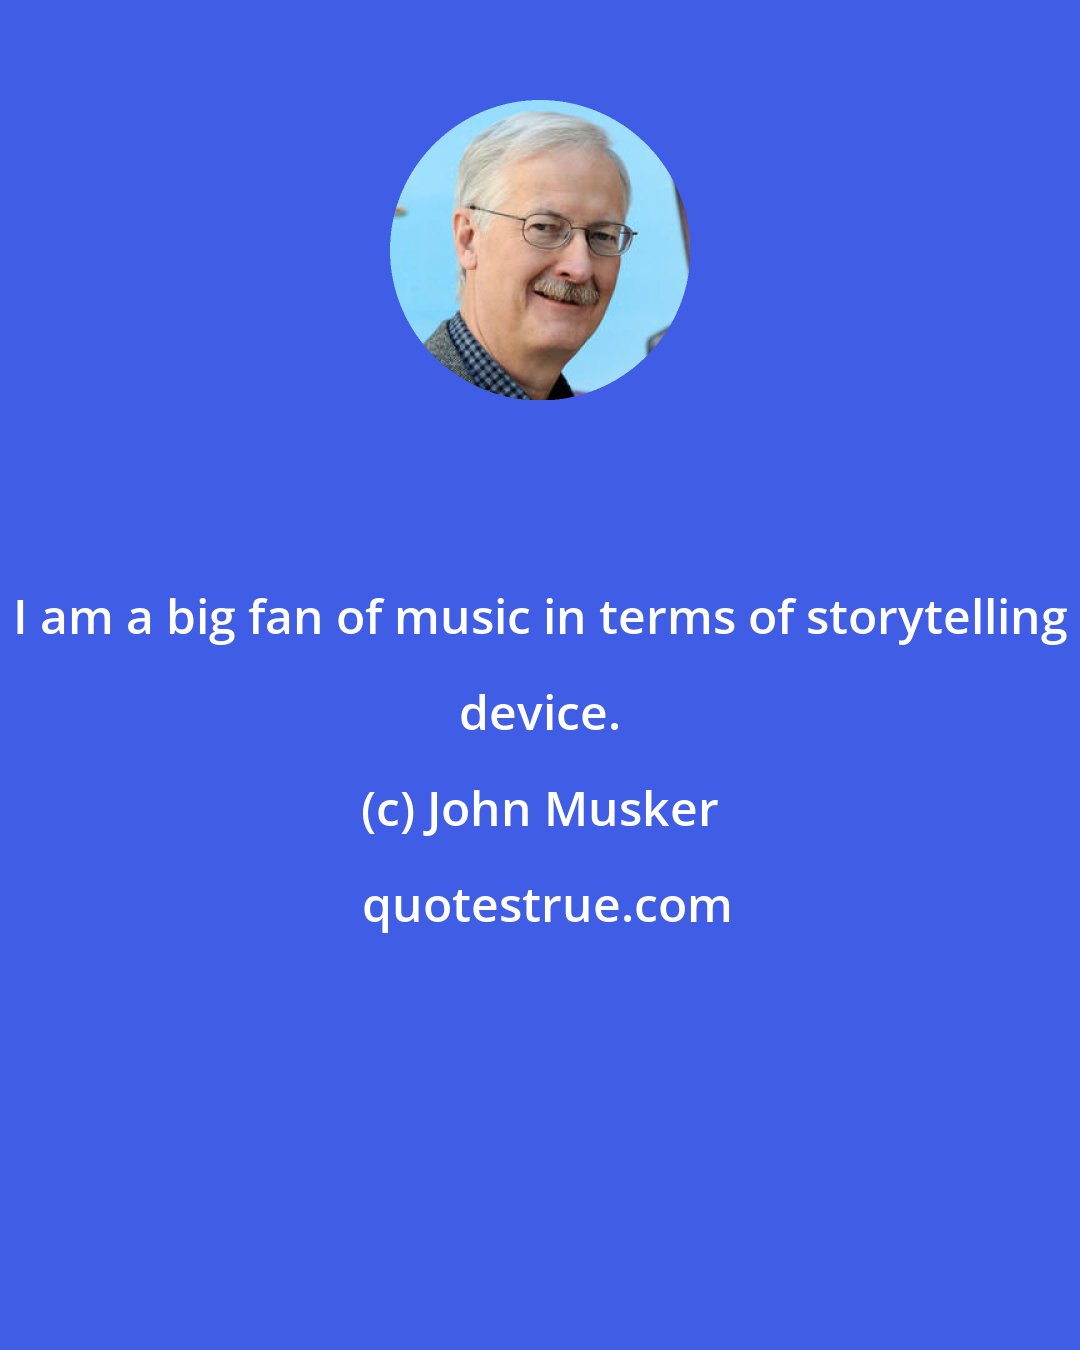 John Musker: I am a big fan of music in terms of storytelling device.